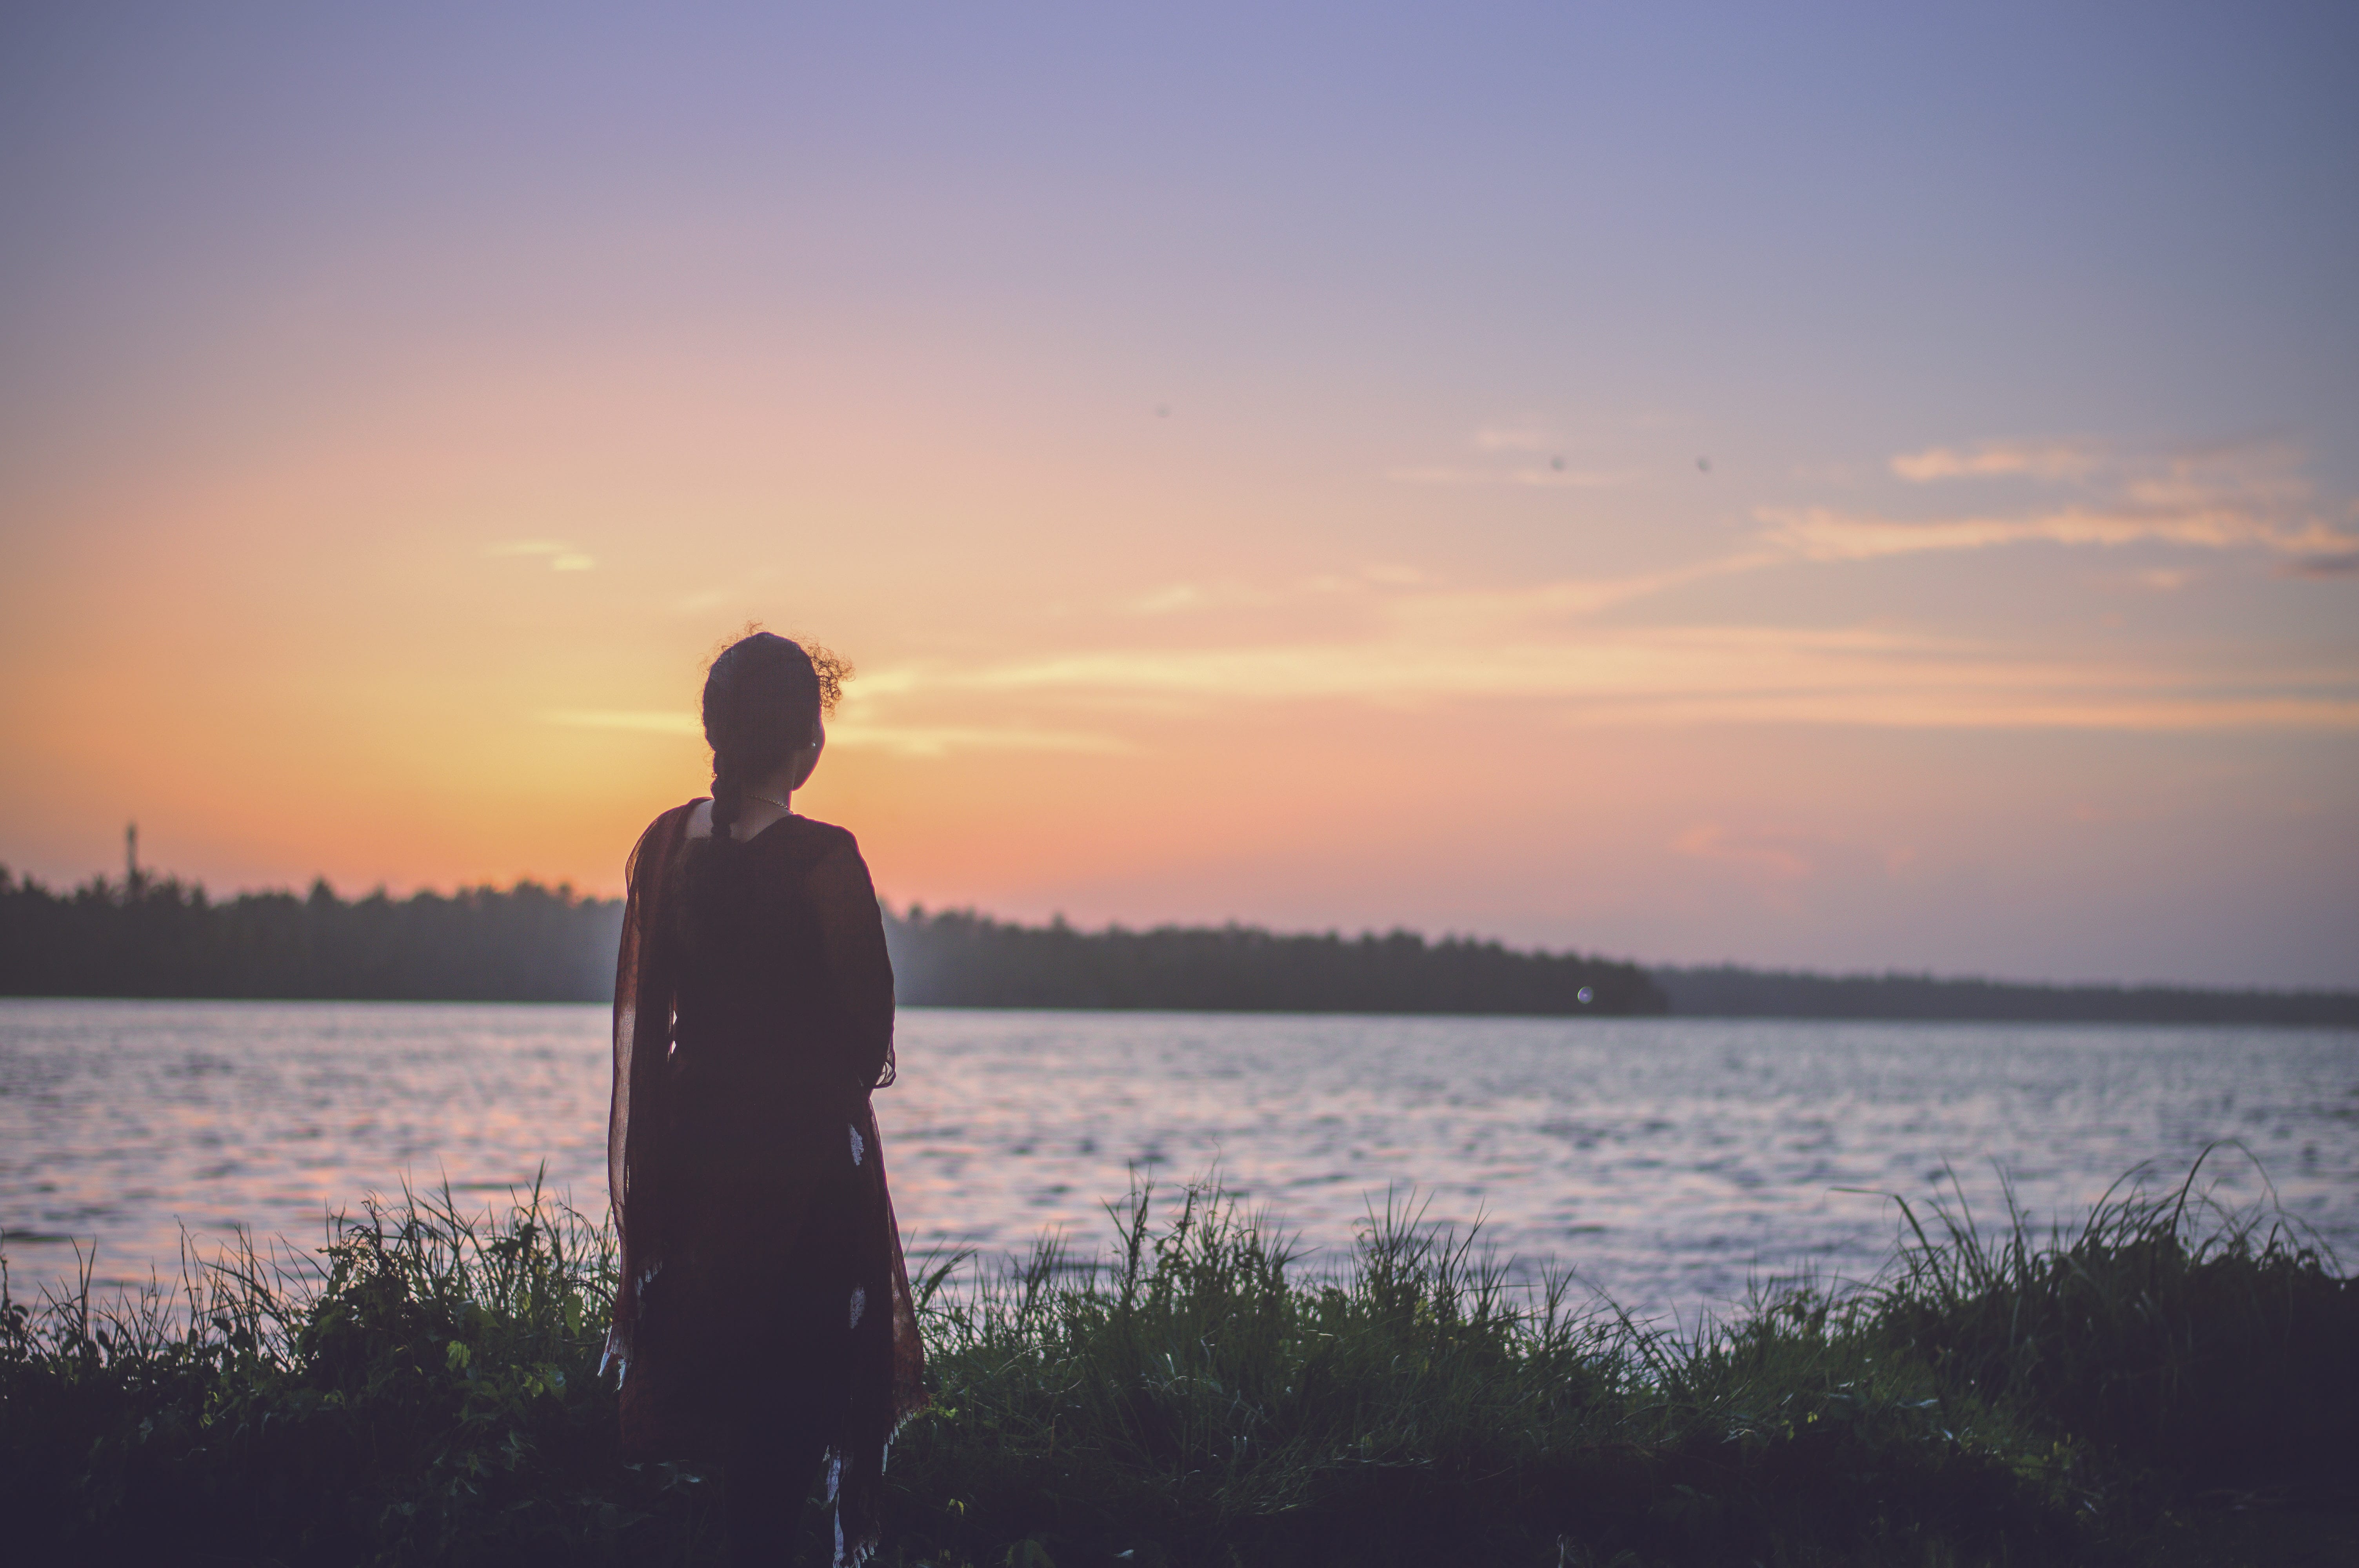 Woman looking at body of water at sunset; image by Praveesh Palakeel, via Unsplash.com.